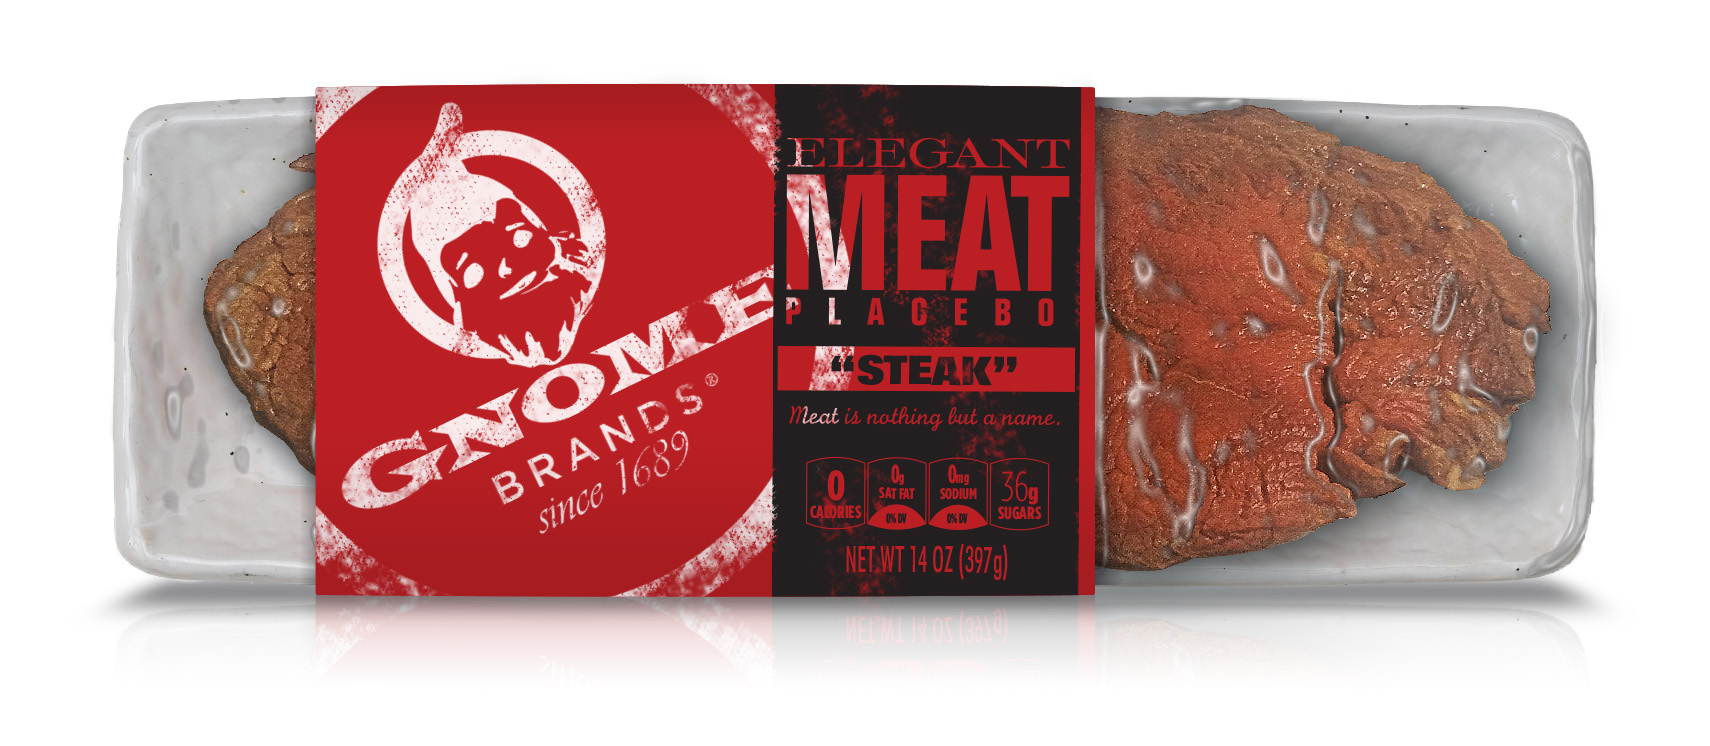 Elegant “Meat” Placebos by Gnome Brands®